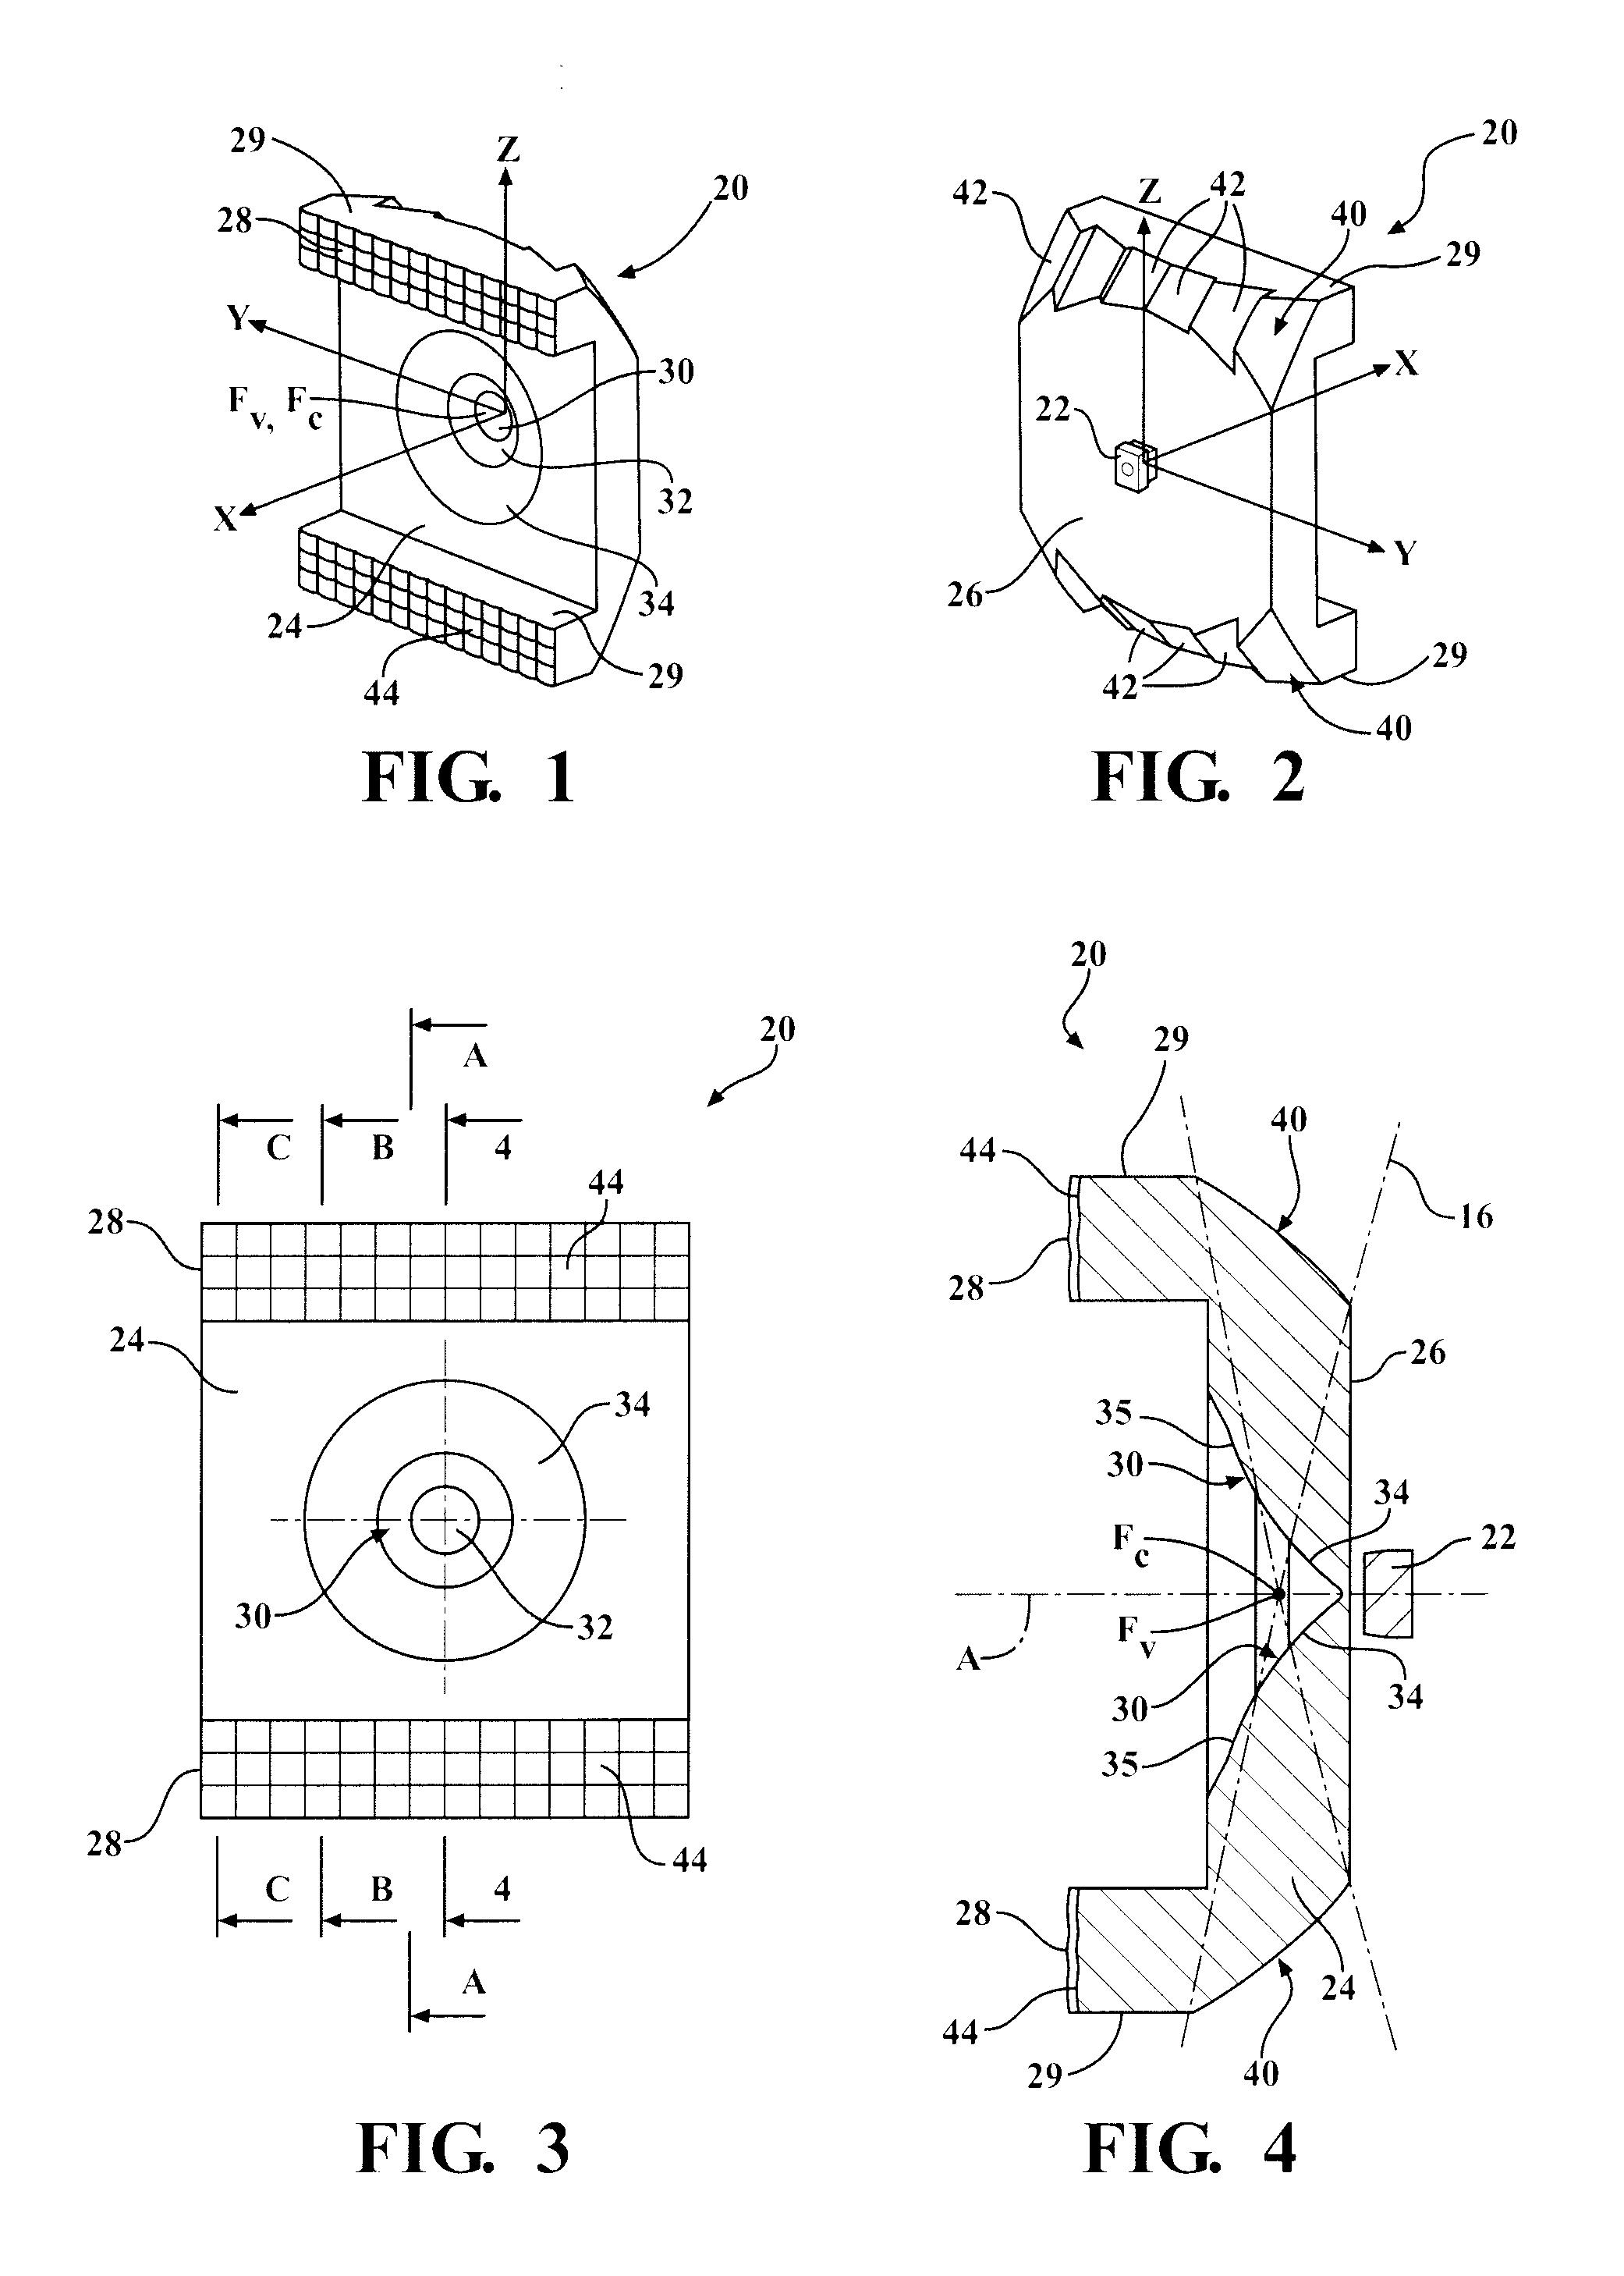 Collimator assembly